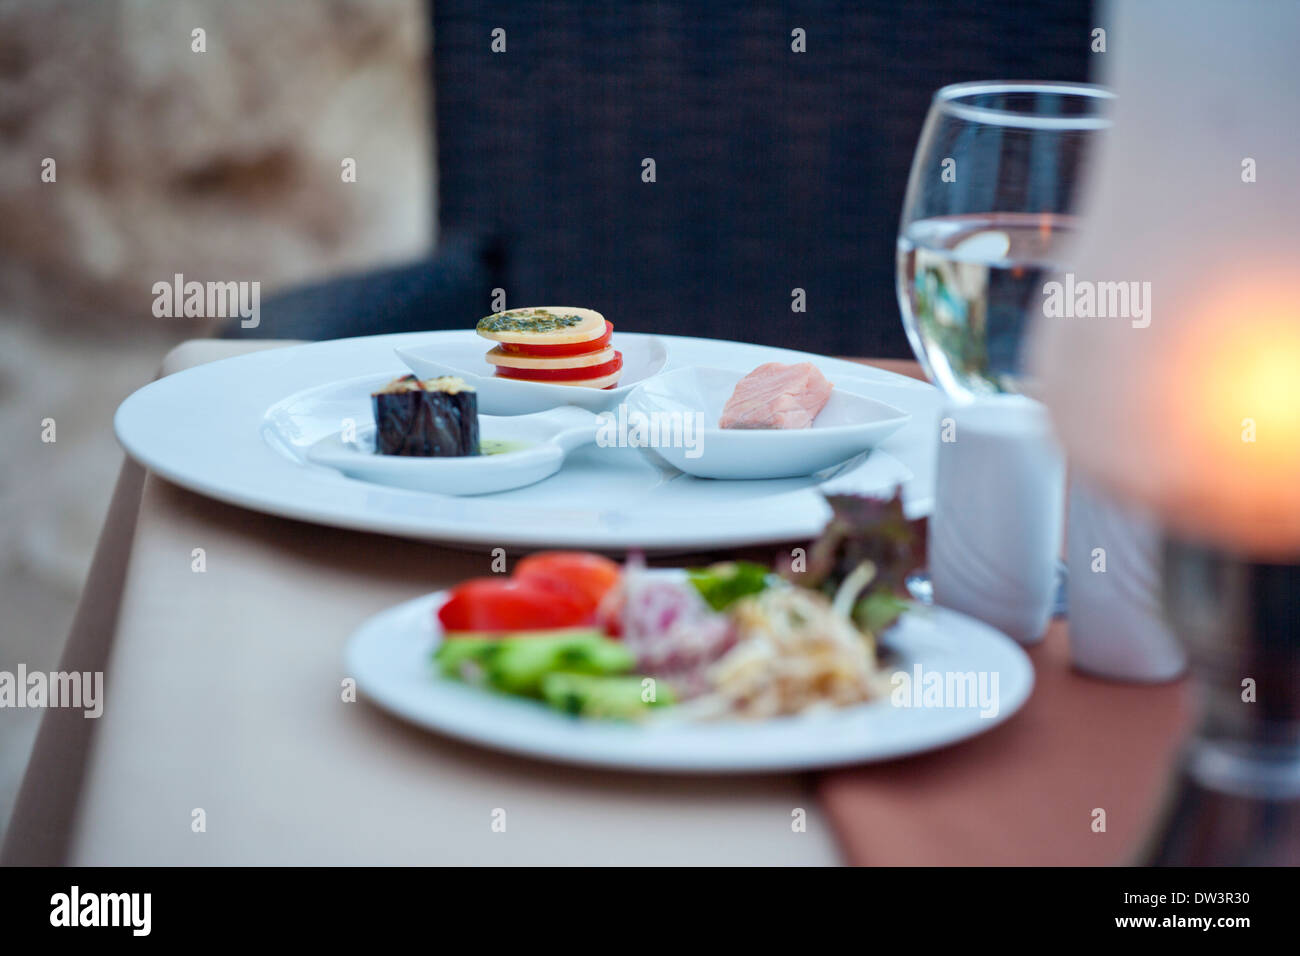 shallow focus image of food starters Stock Photo